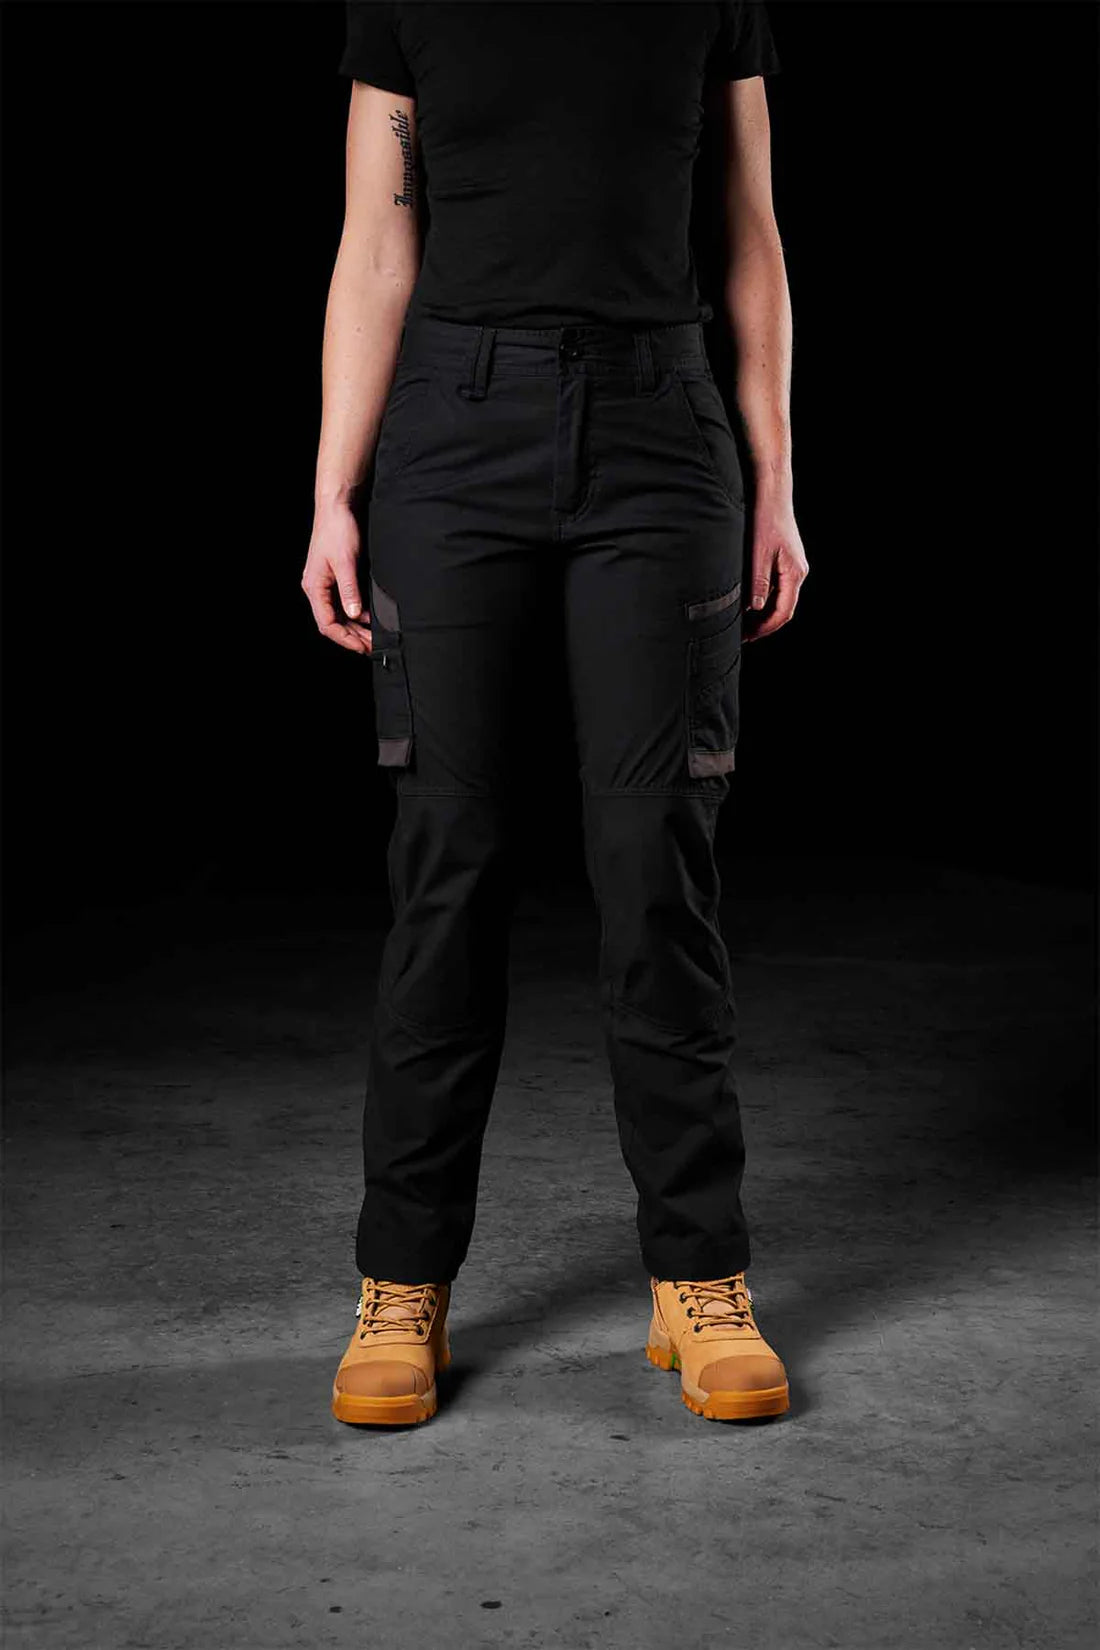 Ladies Ripstop Stretch Work Pants - made by FXD Workwear